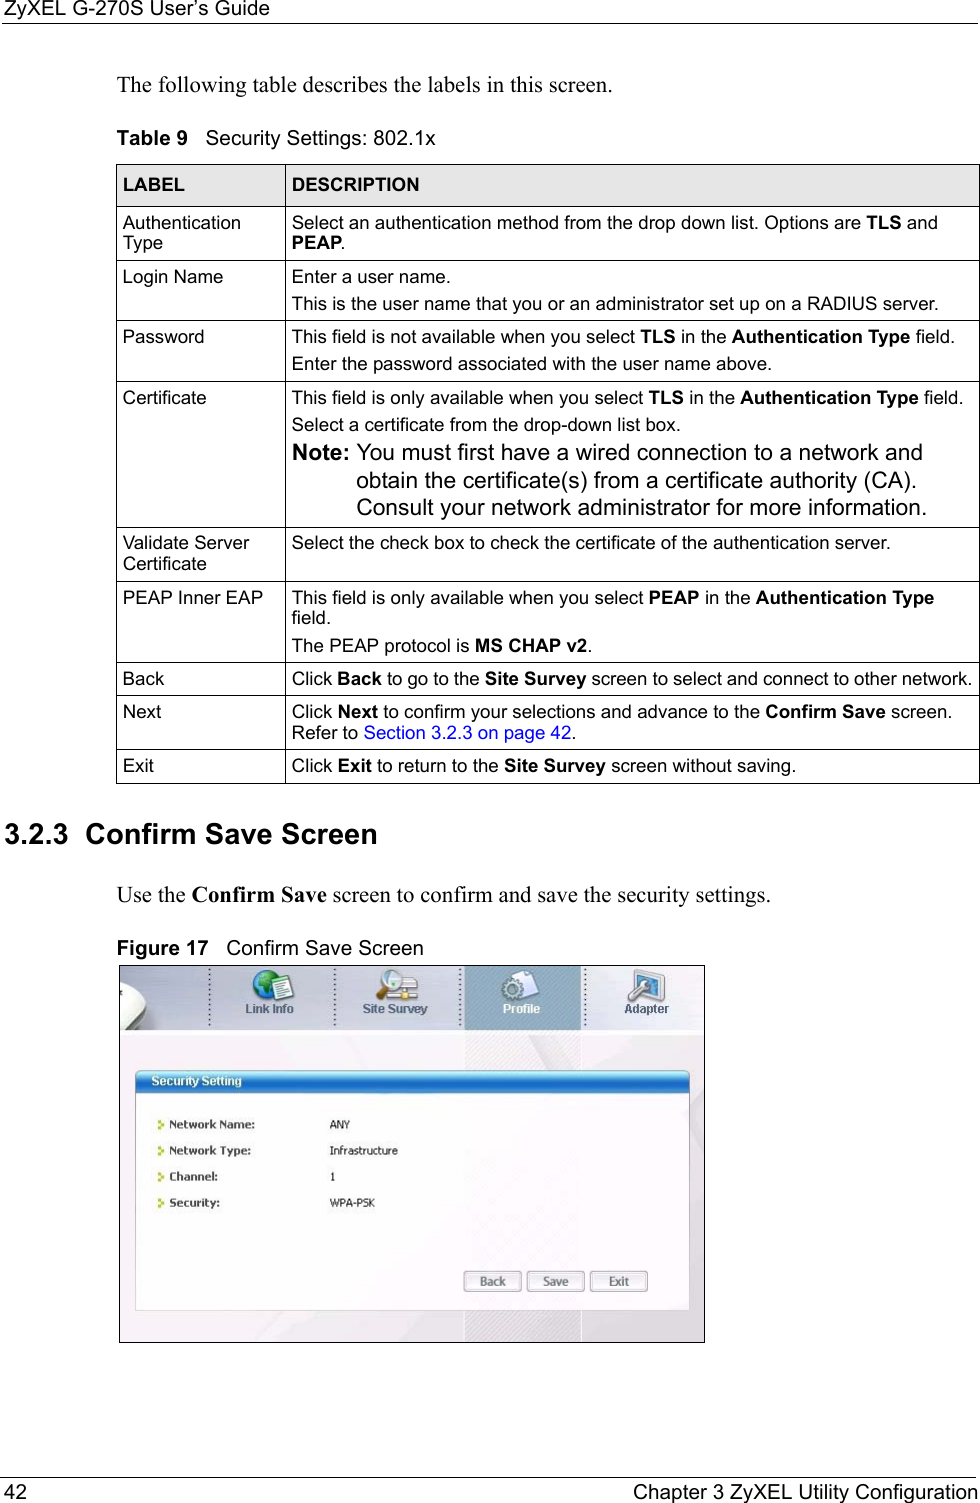 ZyXEL G-270S User’s Guide42 Chapter 3 ZyXEL Utility ConfigurationThe following table describes the labels in this screen.  3.2.3  Confirm Save ScreenUse the Confirm Save screen to confirm and save the security settings.Figure 17   Confirm Save Screen Table 9   Security Settings: 802.1xLABEL DESCRIPTIONAuthentication TypeSelect an authentication method from the drop down list. Options are TLS and PEAP.Login Name Enter a user name. This is the user name that you or an administrator set up on a RADIUS server.Password This field is not available when you select TLS in the Authentication Type field. Enter the password associated with the user name above. Certificate This field is only available when you select TLS in the Authentication Type field. Select a certificate from the drop-down list box.Note: You must first have a wired connection to a network and obtain the certificate(s) from a certificate authority (CA). Consult your network administrator for more information.Validate Server CertificateSelect the check box to check the certificate of the authentication server.PEAP Inner EAP This field is only available when you select PEAP in the Authentication Type field.The PEAP protocol is MS CHAP v2.Back Click Back to go to the Site Survey screen to select and connect to other network.Next Click Next to confirm your selections and advance to the Confirm Save screen. Refer to Section 3.2.3 on page 42. Exit Click Exit to return to the Site Survey screen without saving.